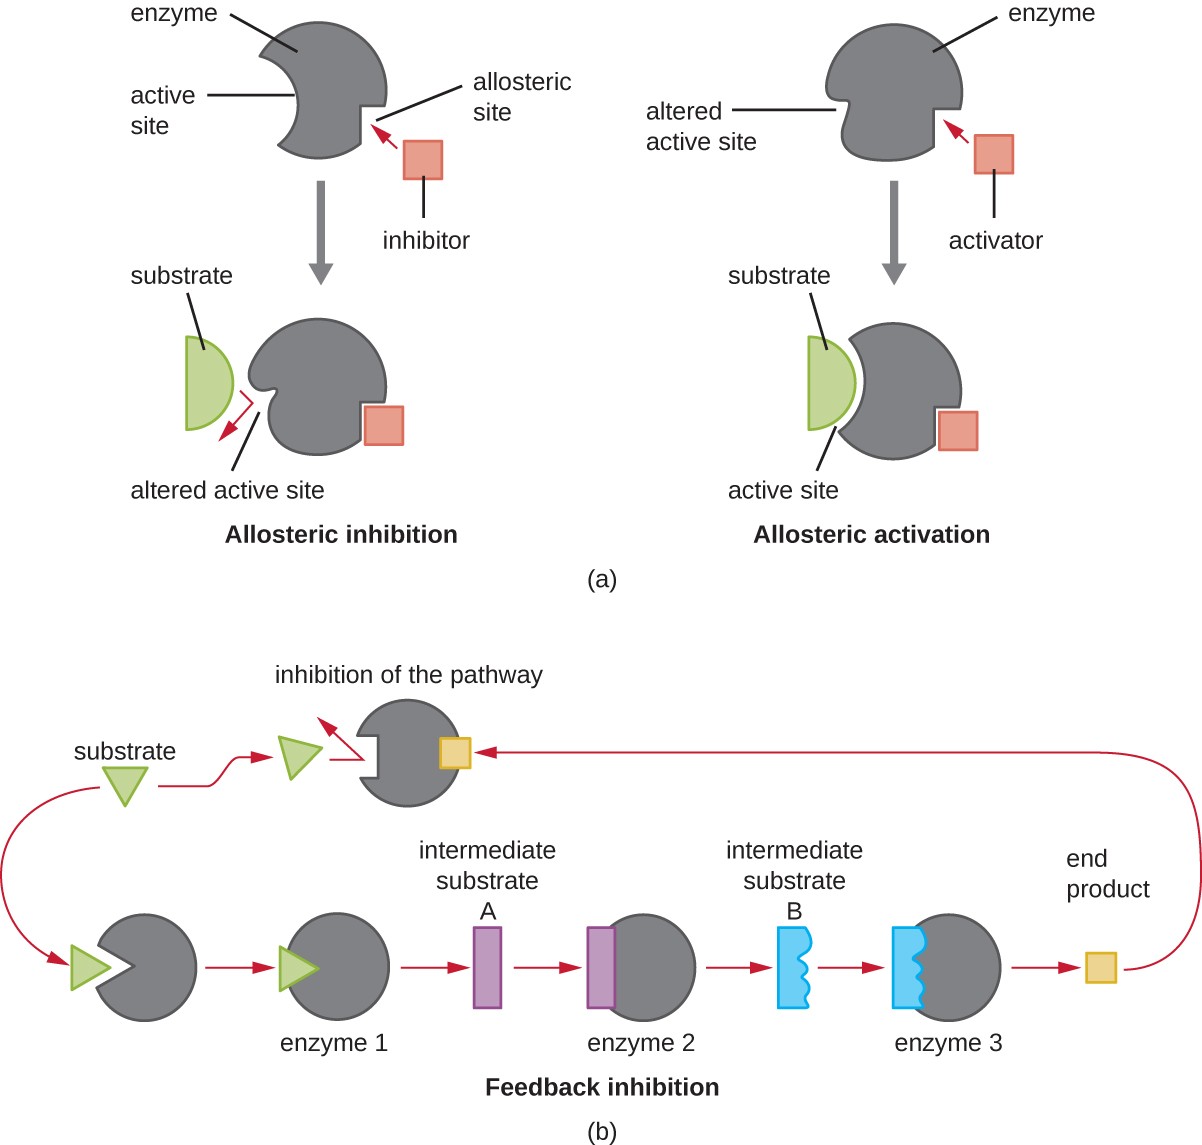 (A).illustration of allosteric inhibition and allosteric activation (B).illustration of feedback inhibition